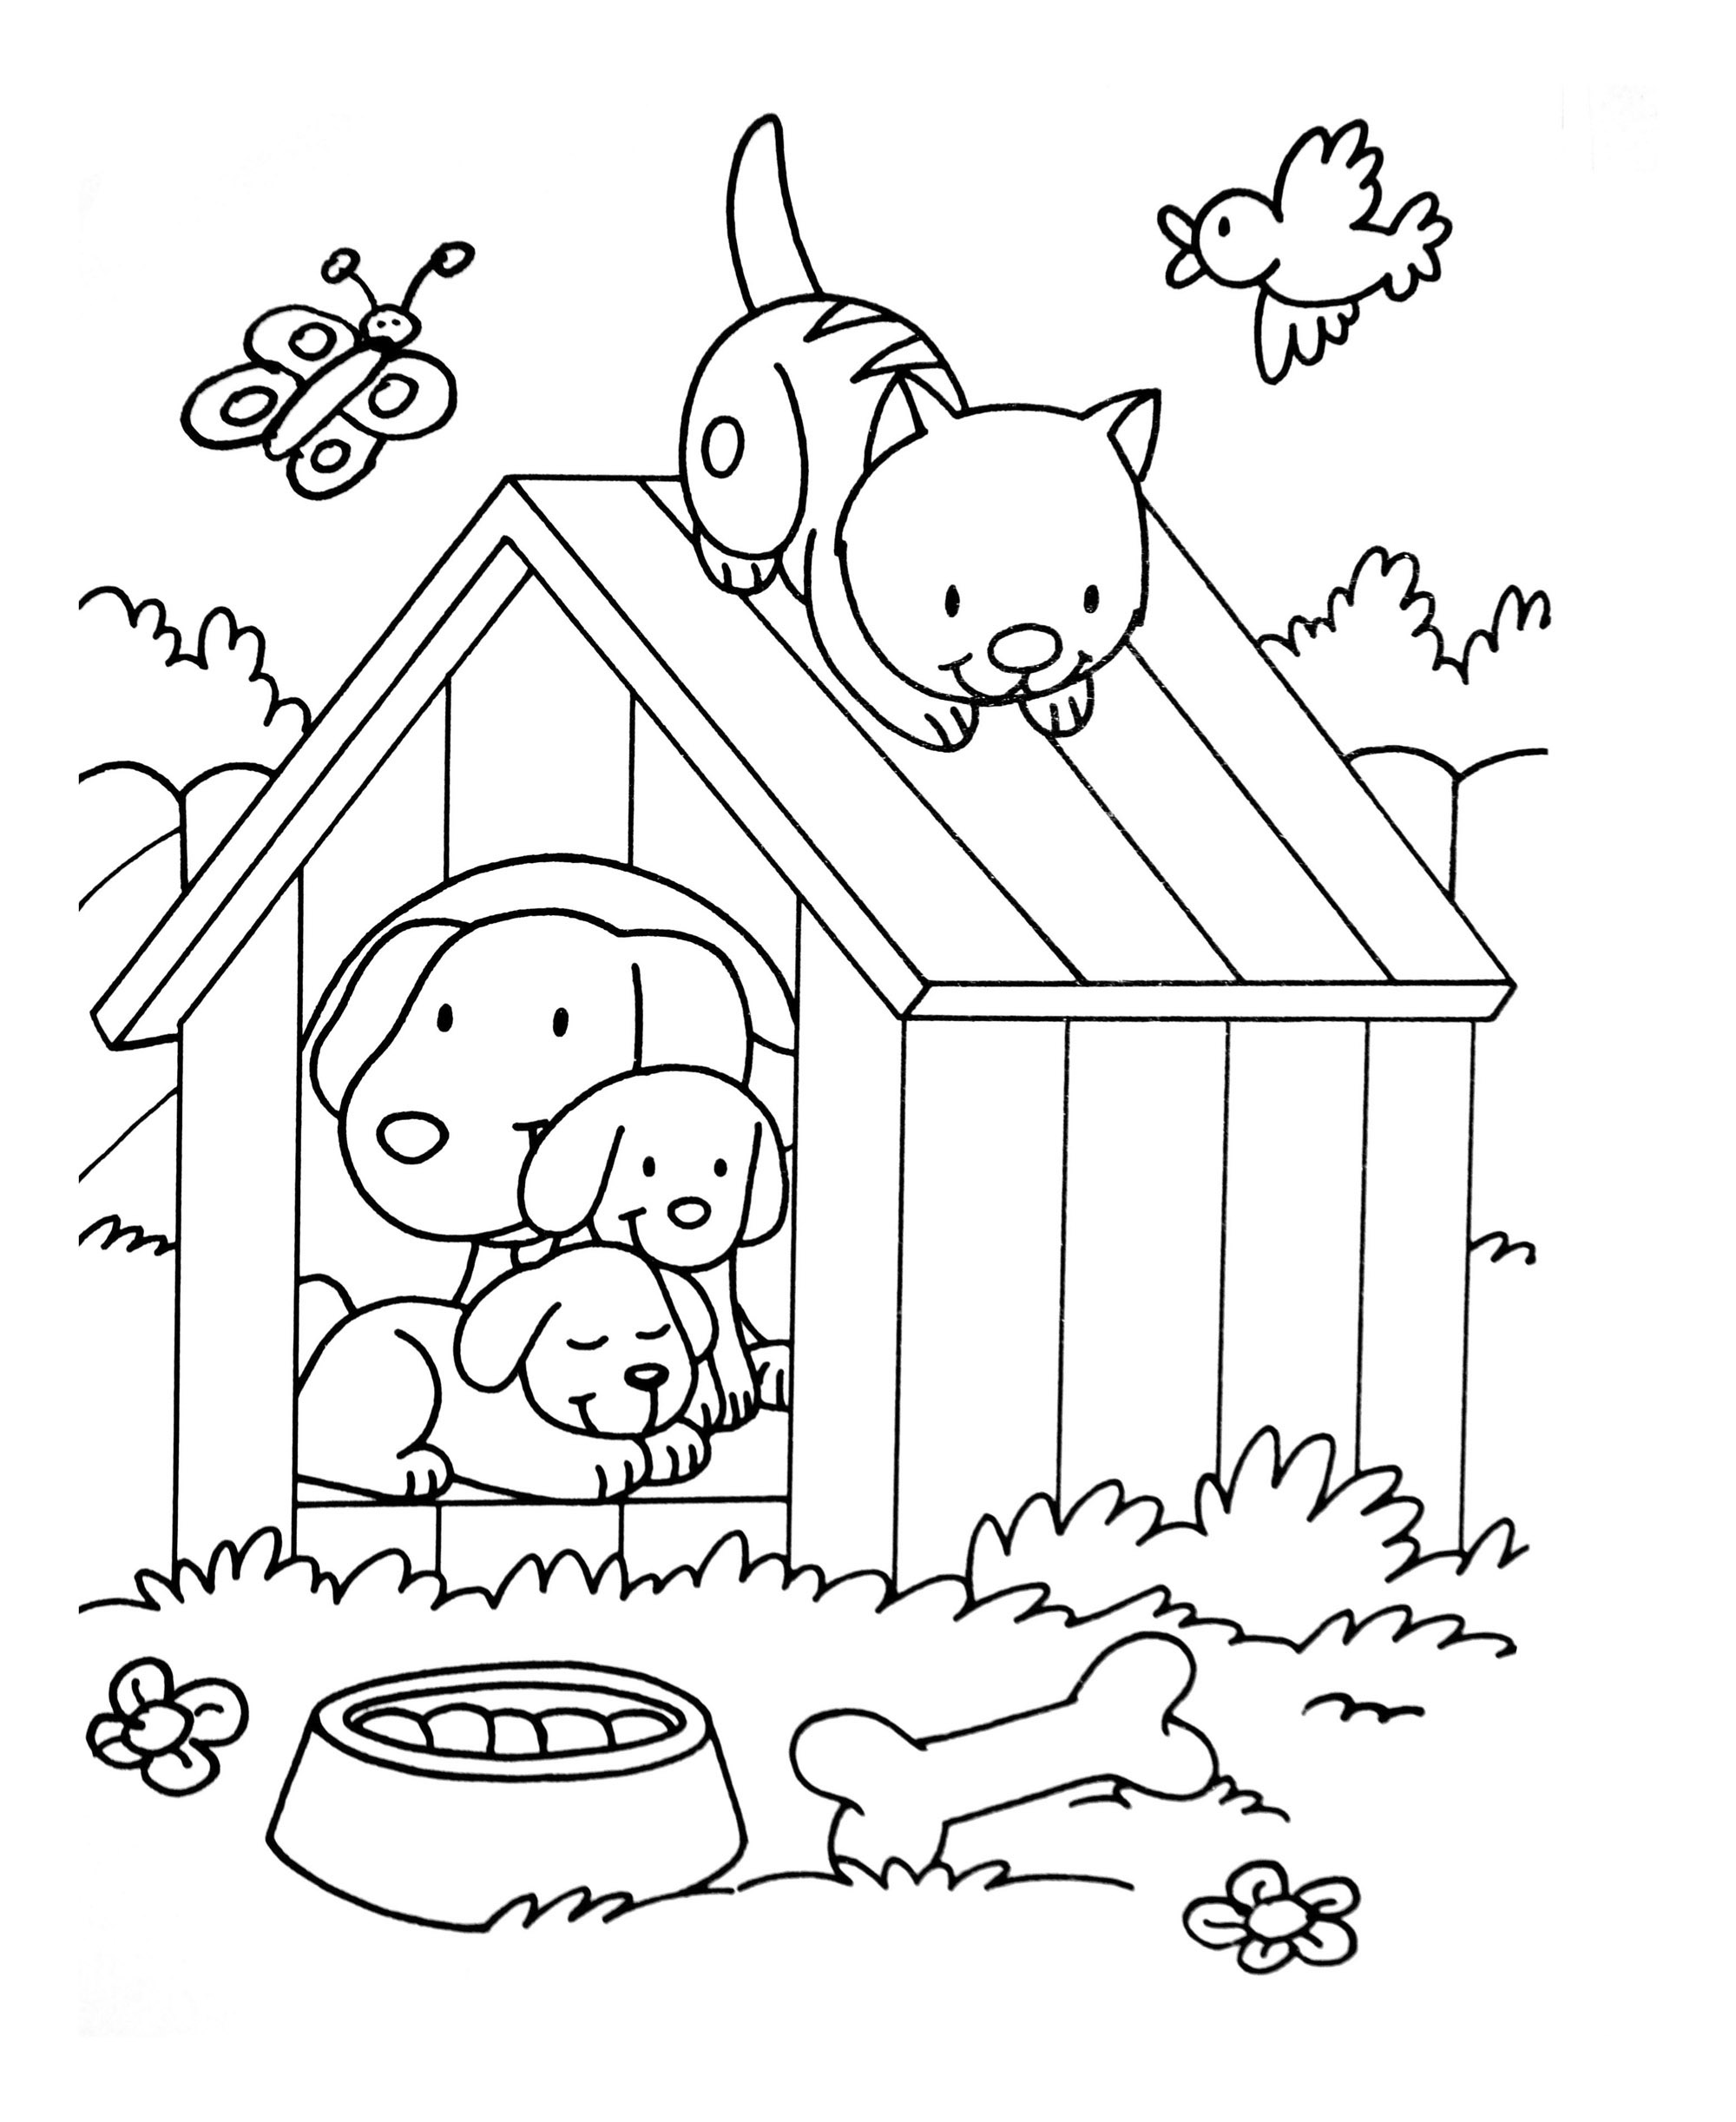 coloring pages of cats and dogs